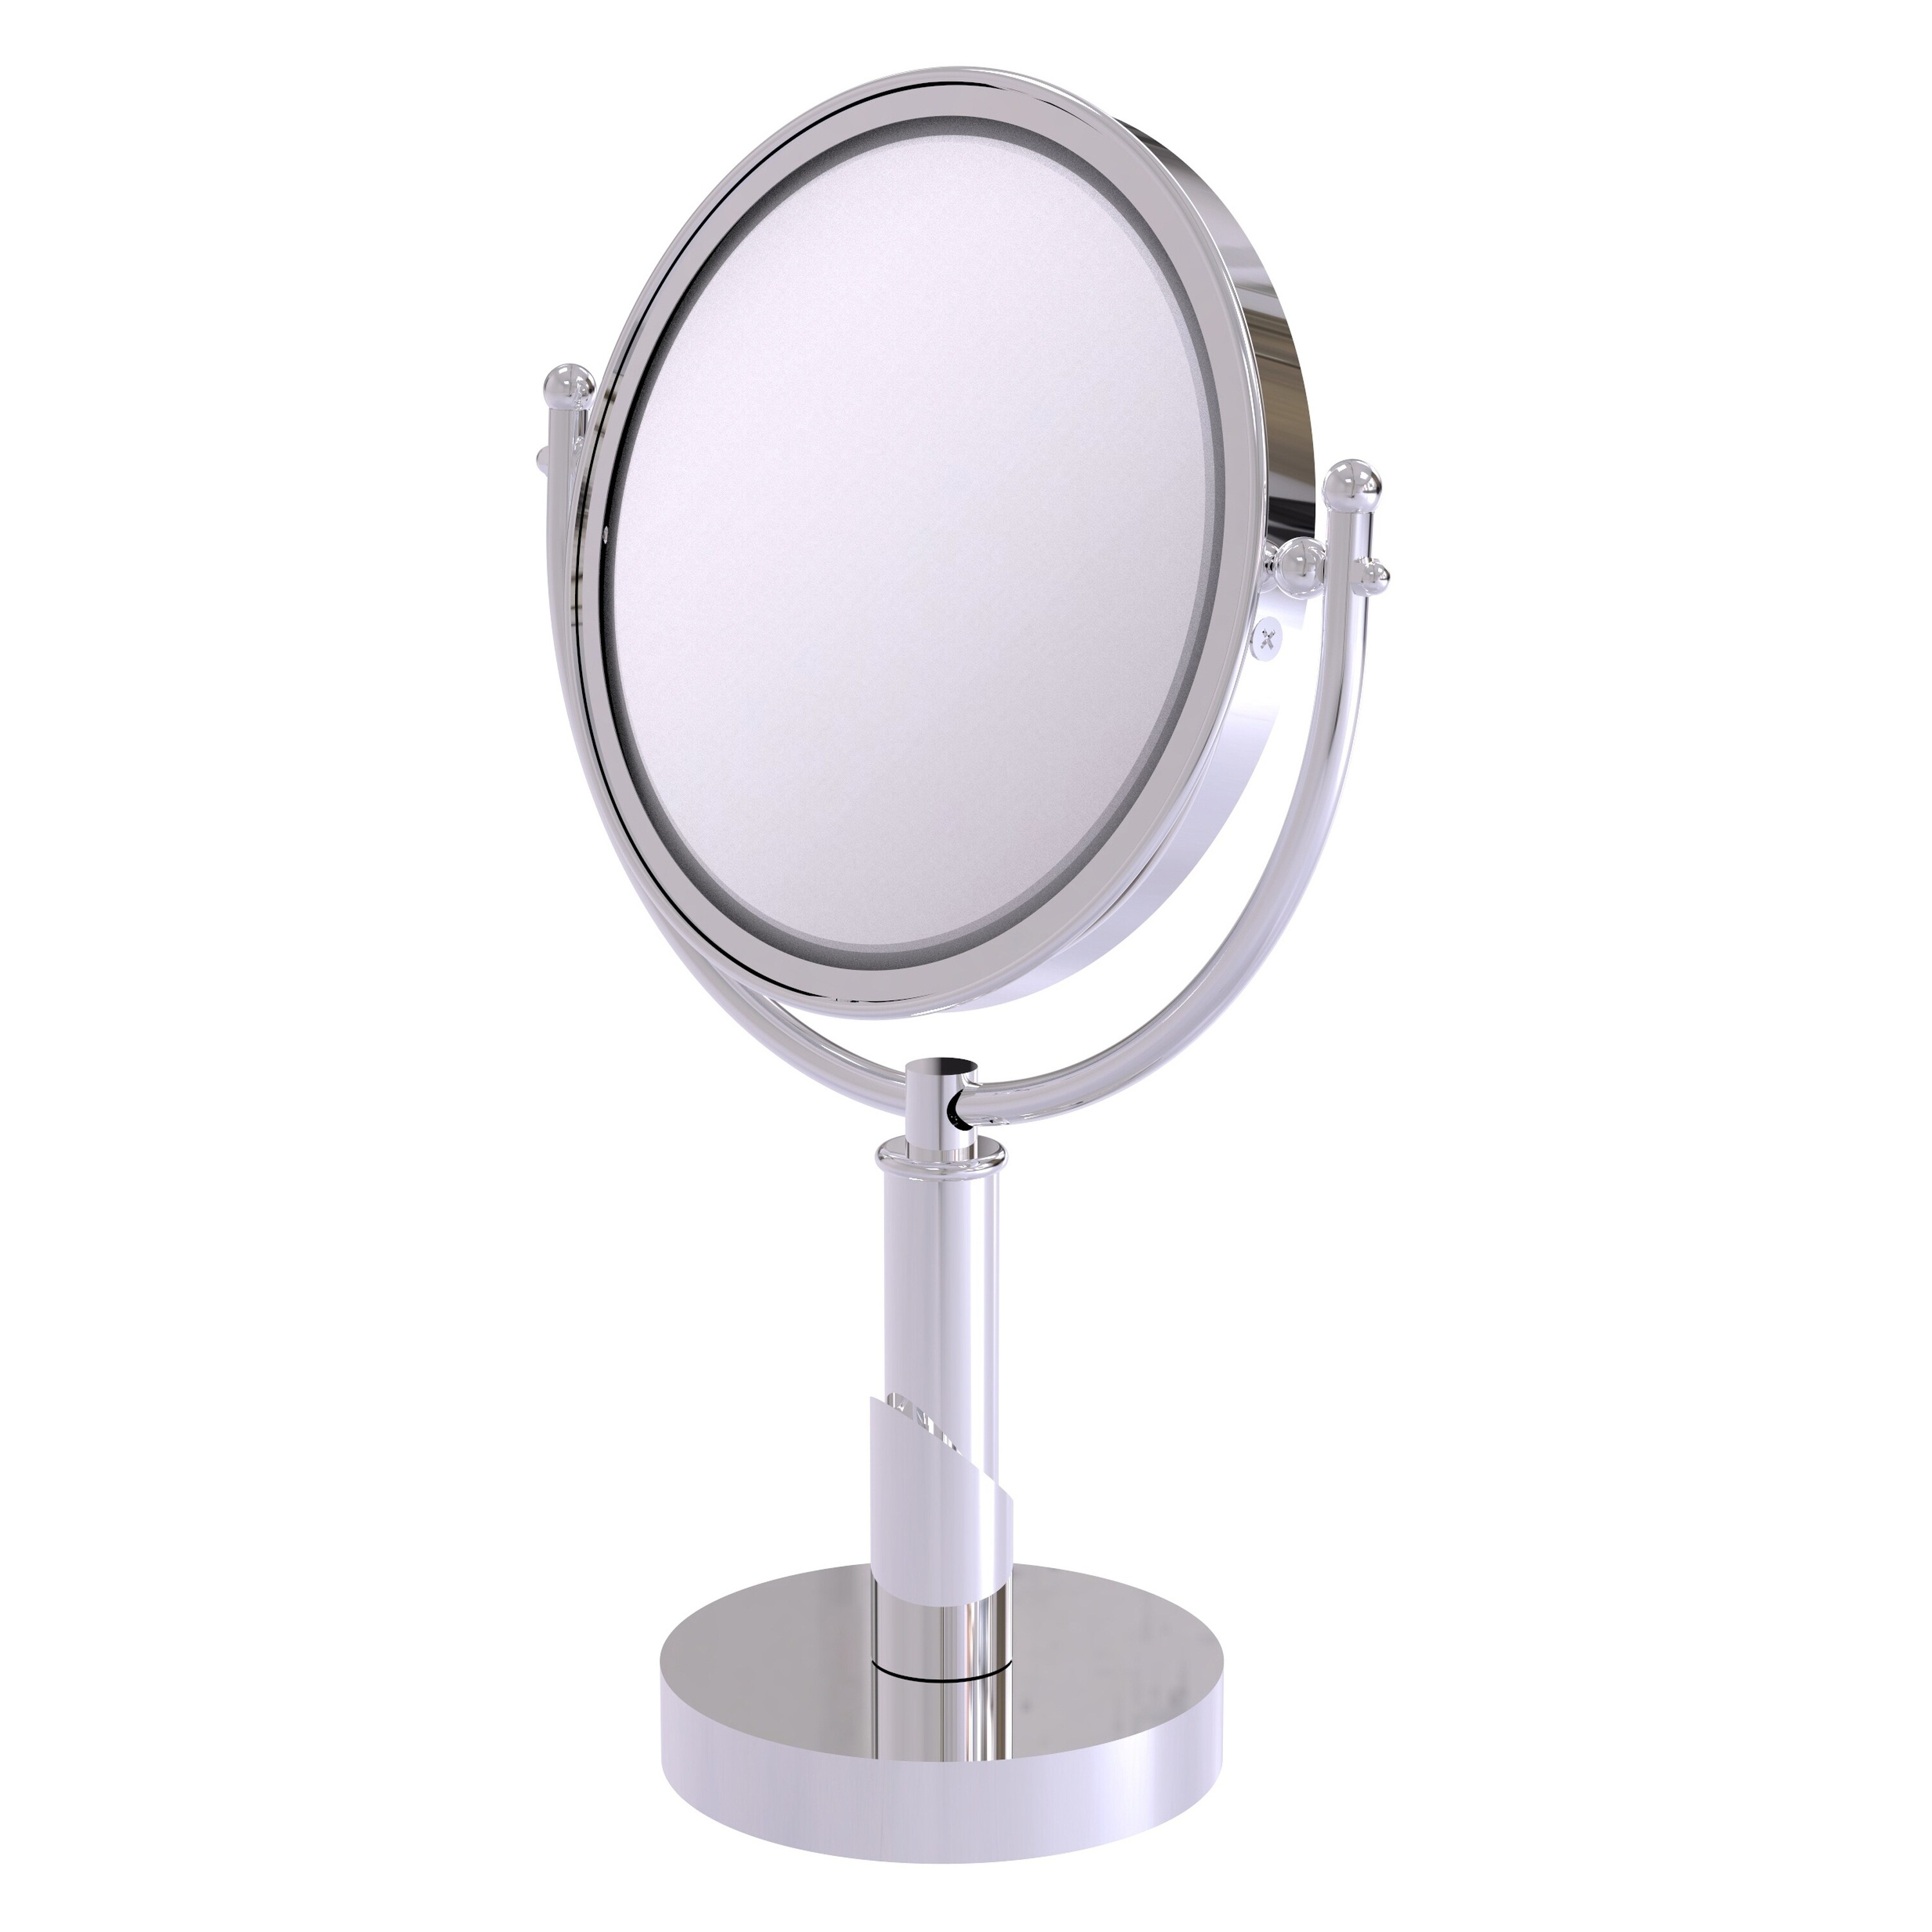 Soho 8-in x 15-in Polished Gold Double-sided 2X Magnifying Countertop Vanity Mirror | - Allied Brass SH-4/2X-PC